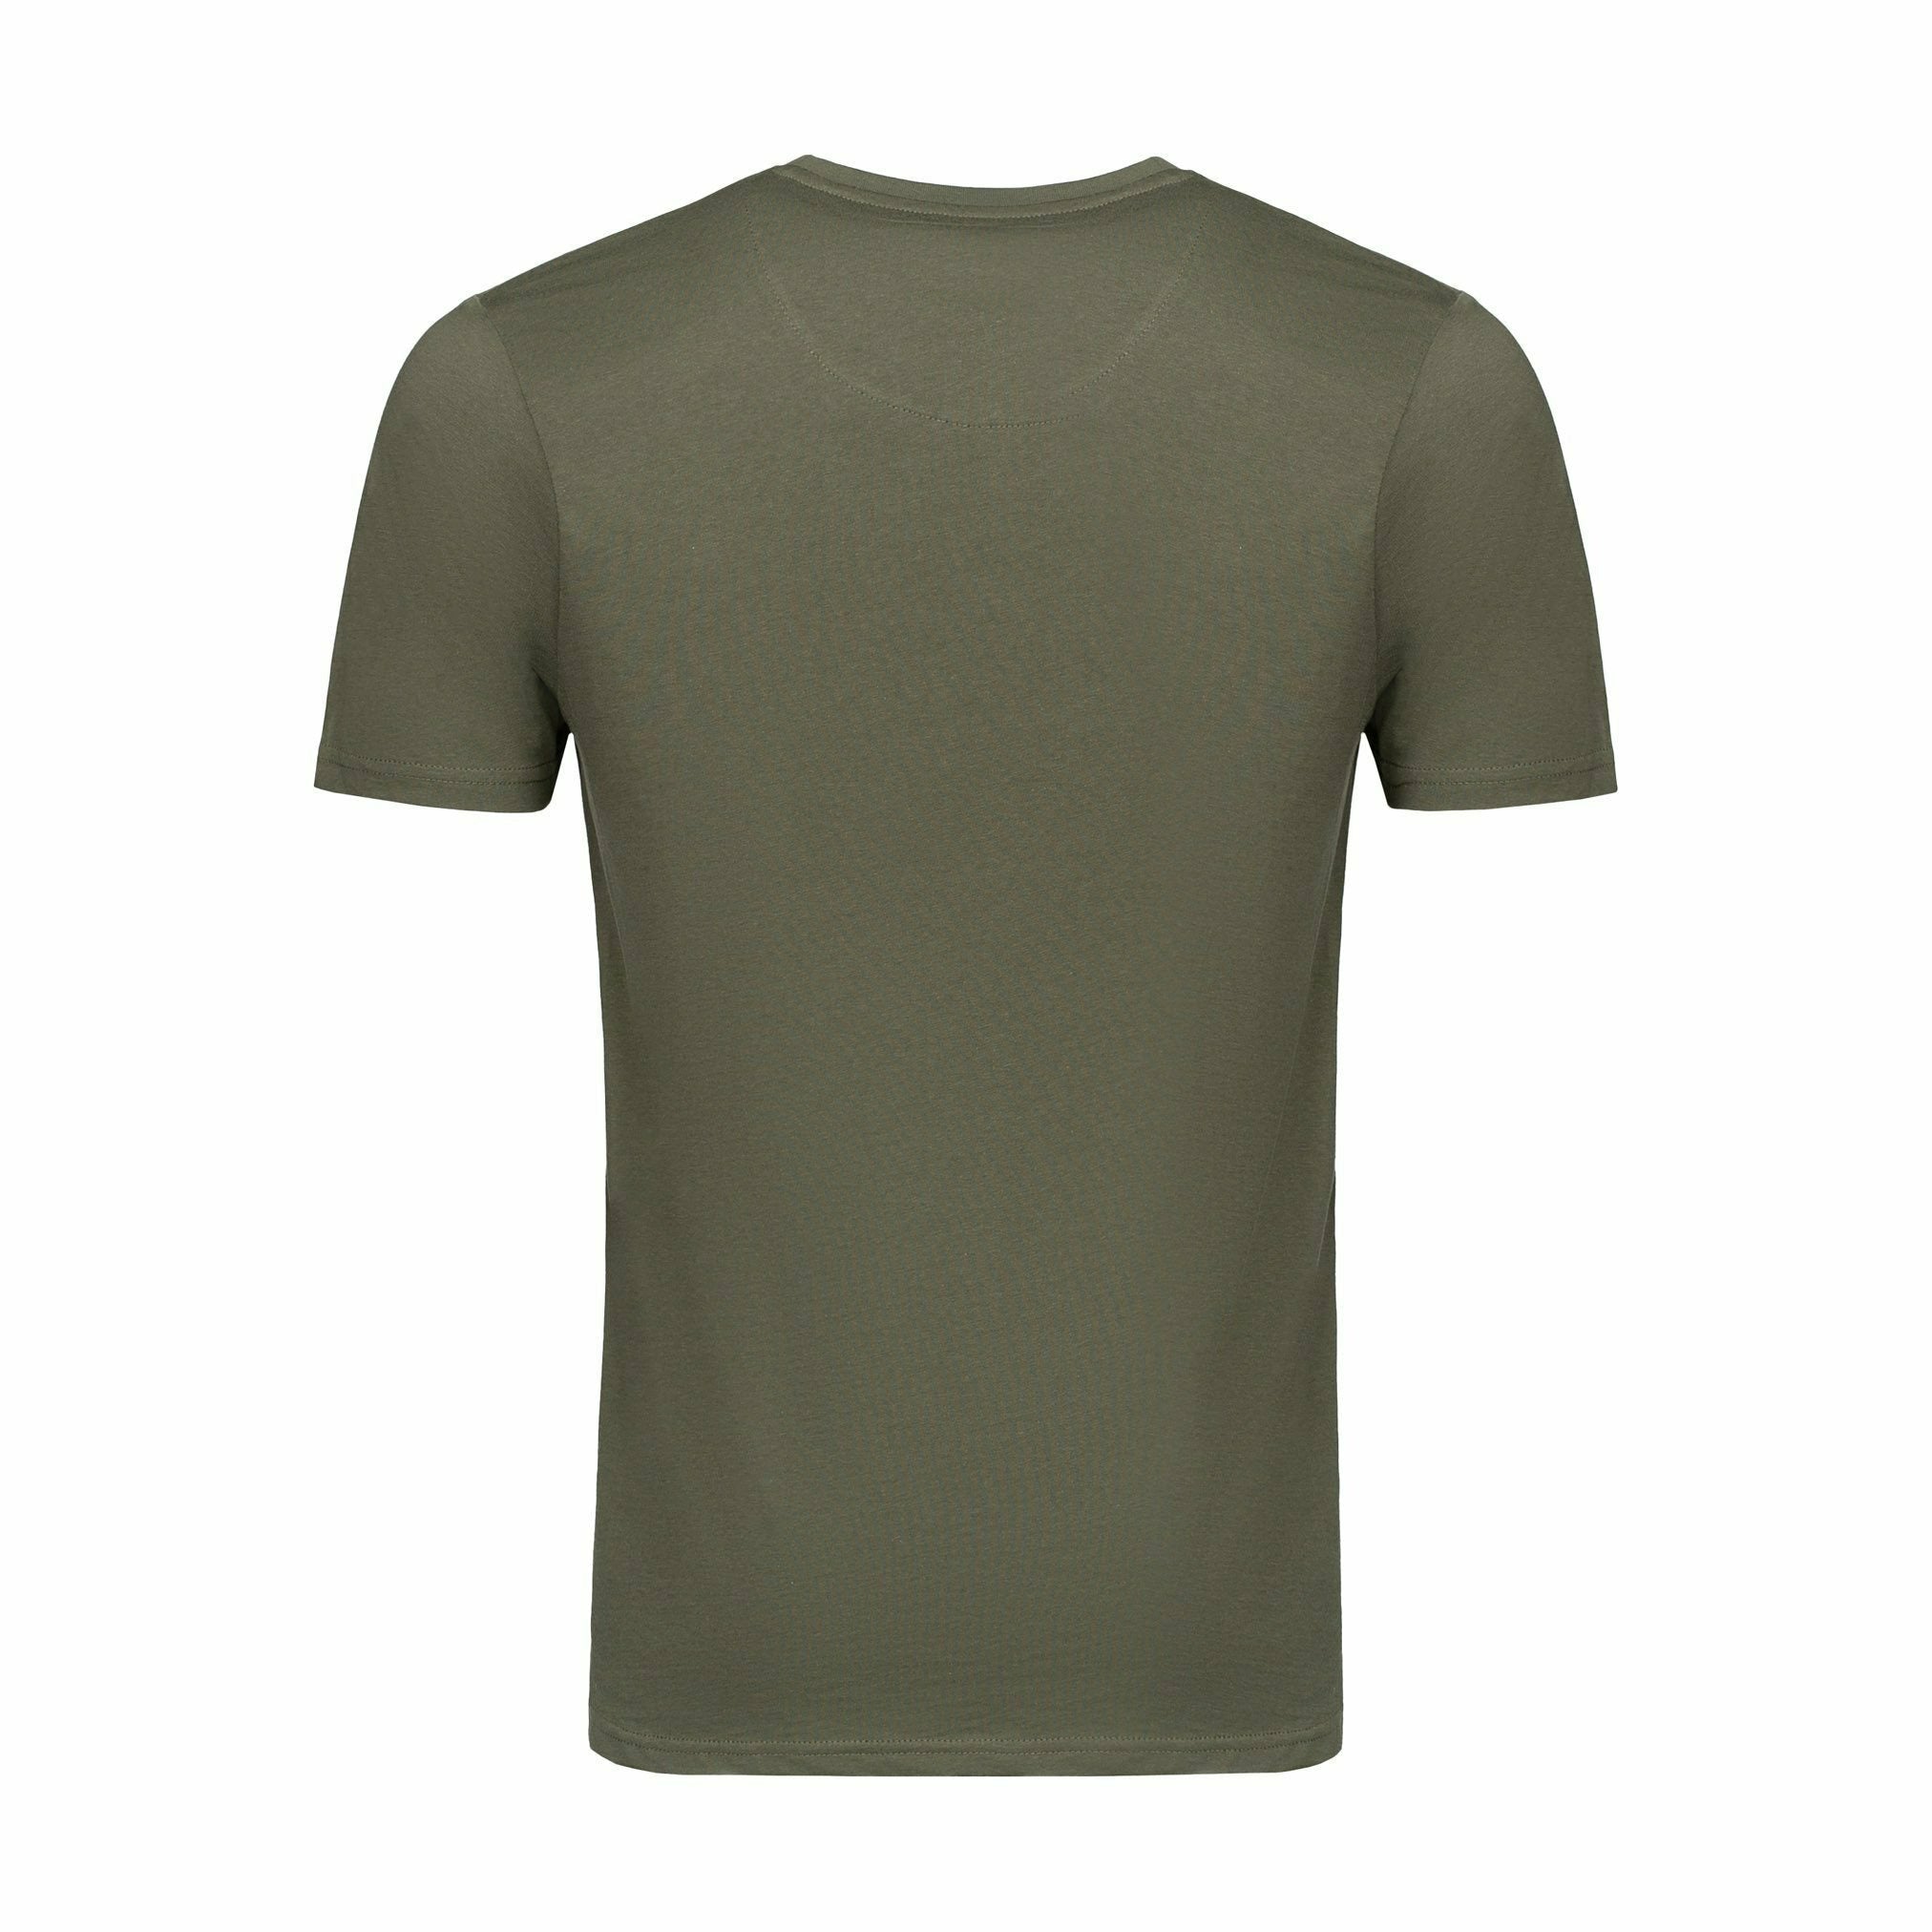 Shop - Mens 'OLIVER' T-Shirt 5 Pack - CORE ESSENTIAL PACK | Bench.co.uk ...